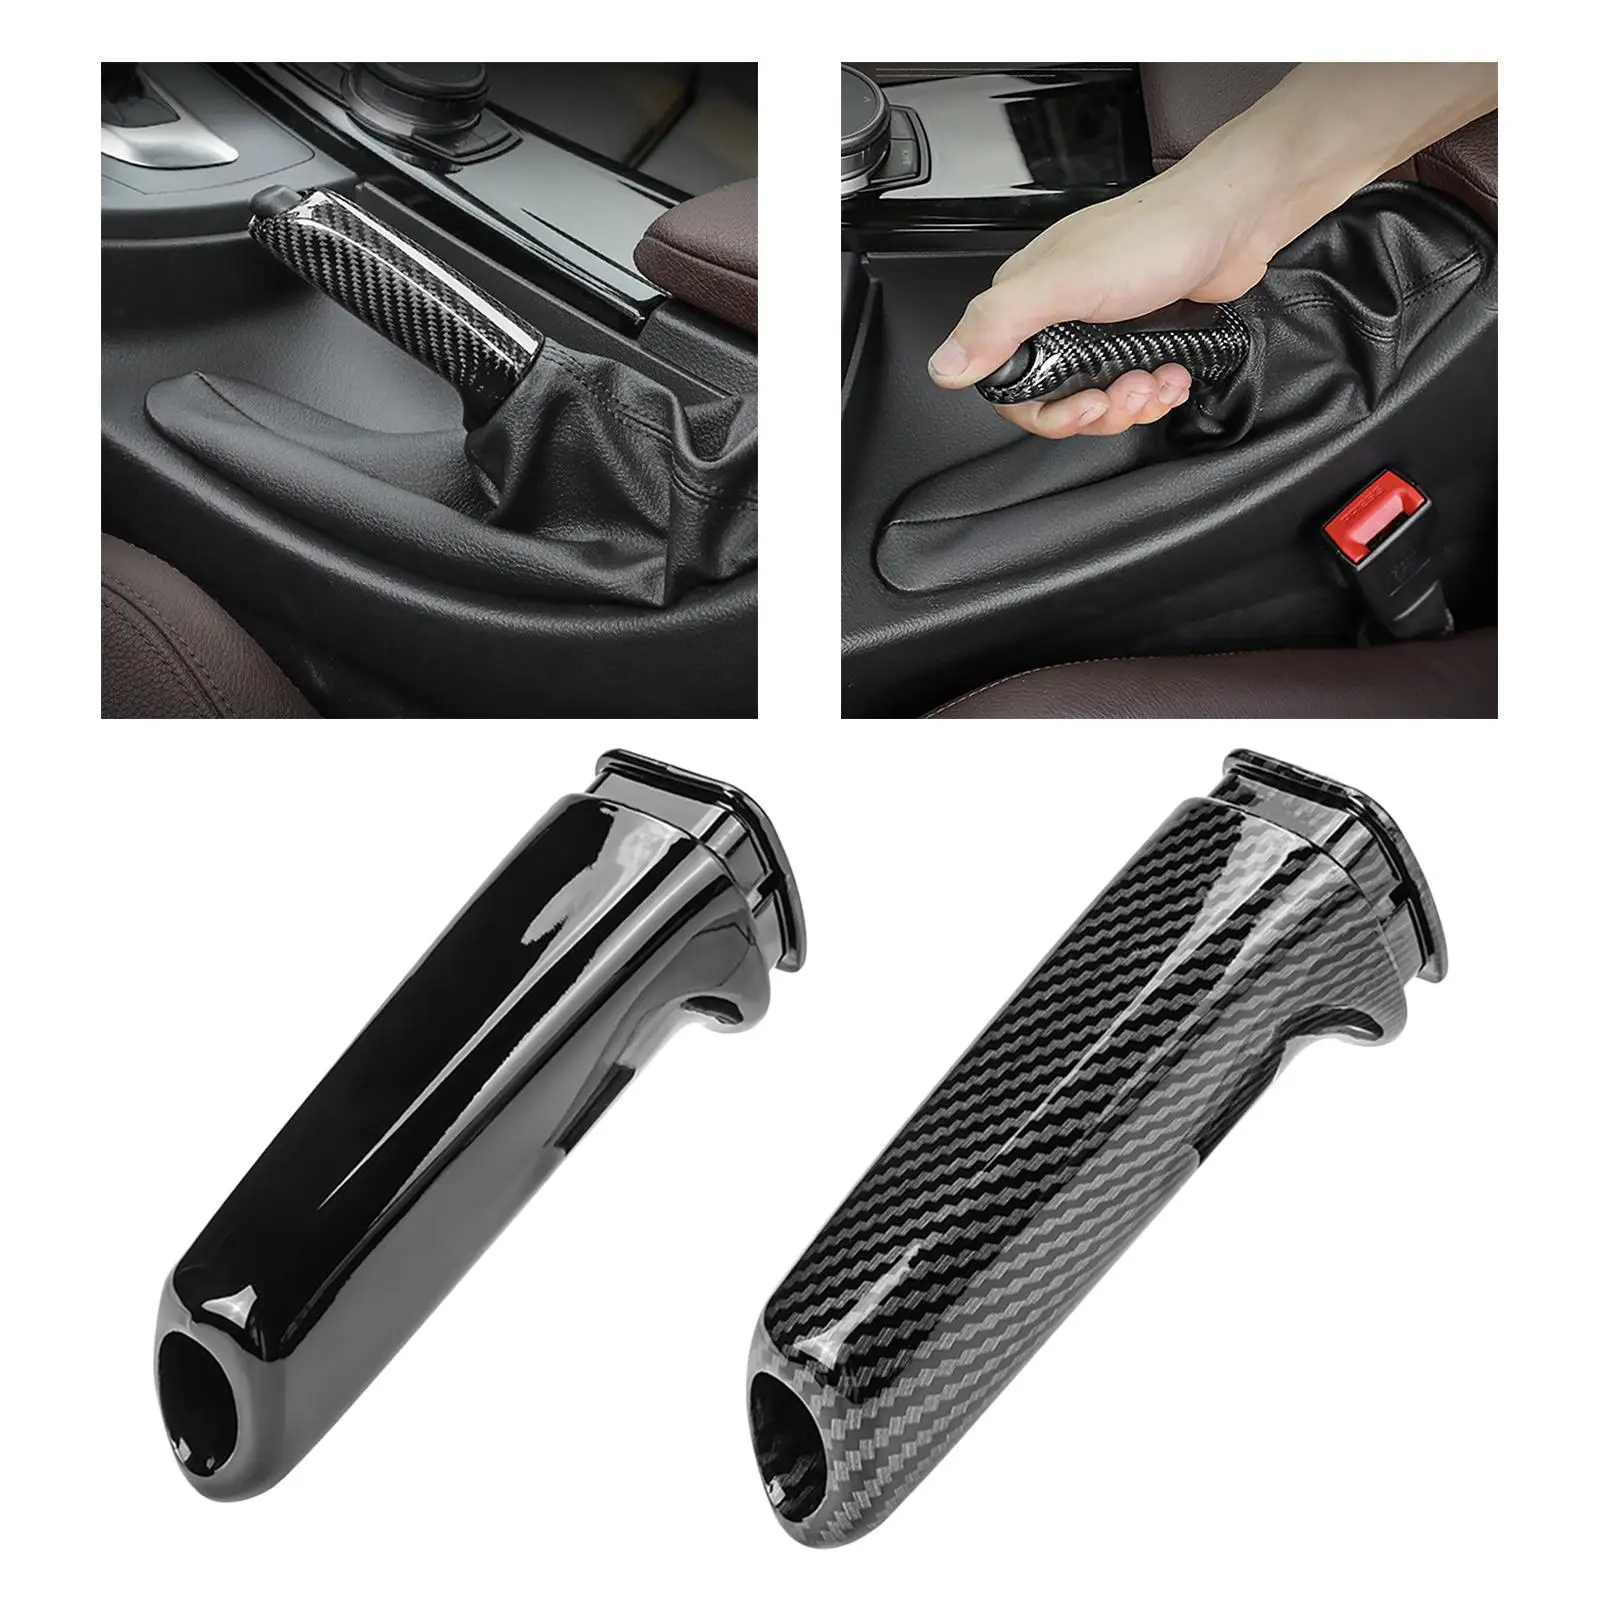 Replacement Handbrake cover truck Handle Grip Cover Handbrake Sleeves Fit for bmw